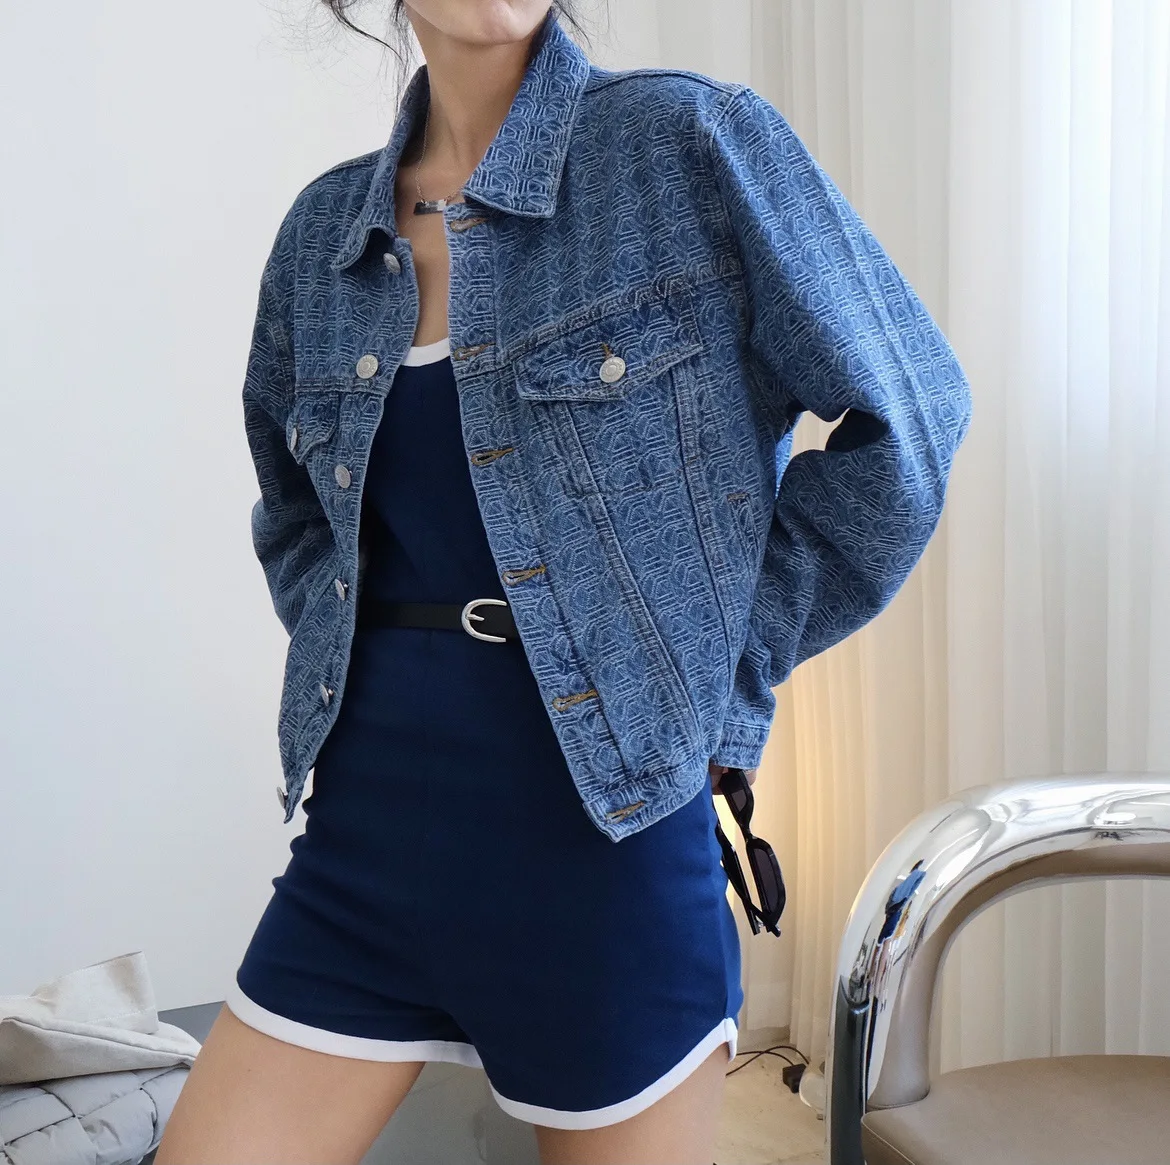 woman stylish new collection jeans jacket-coat